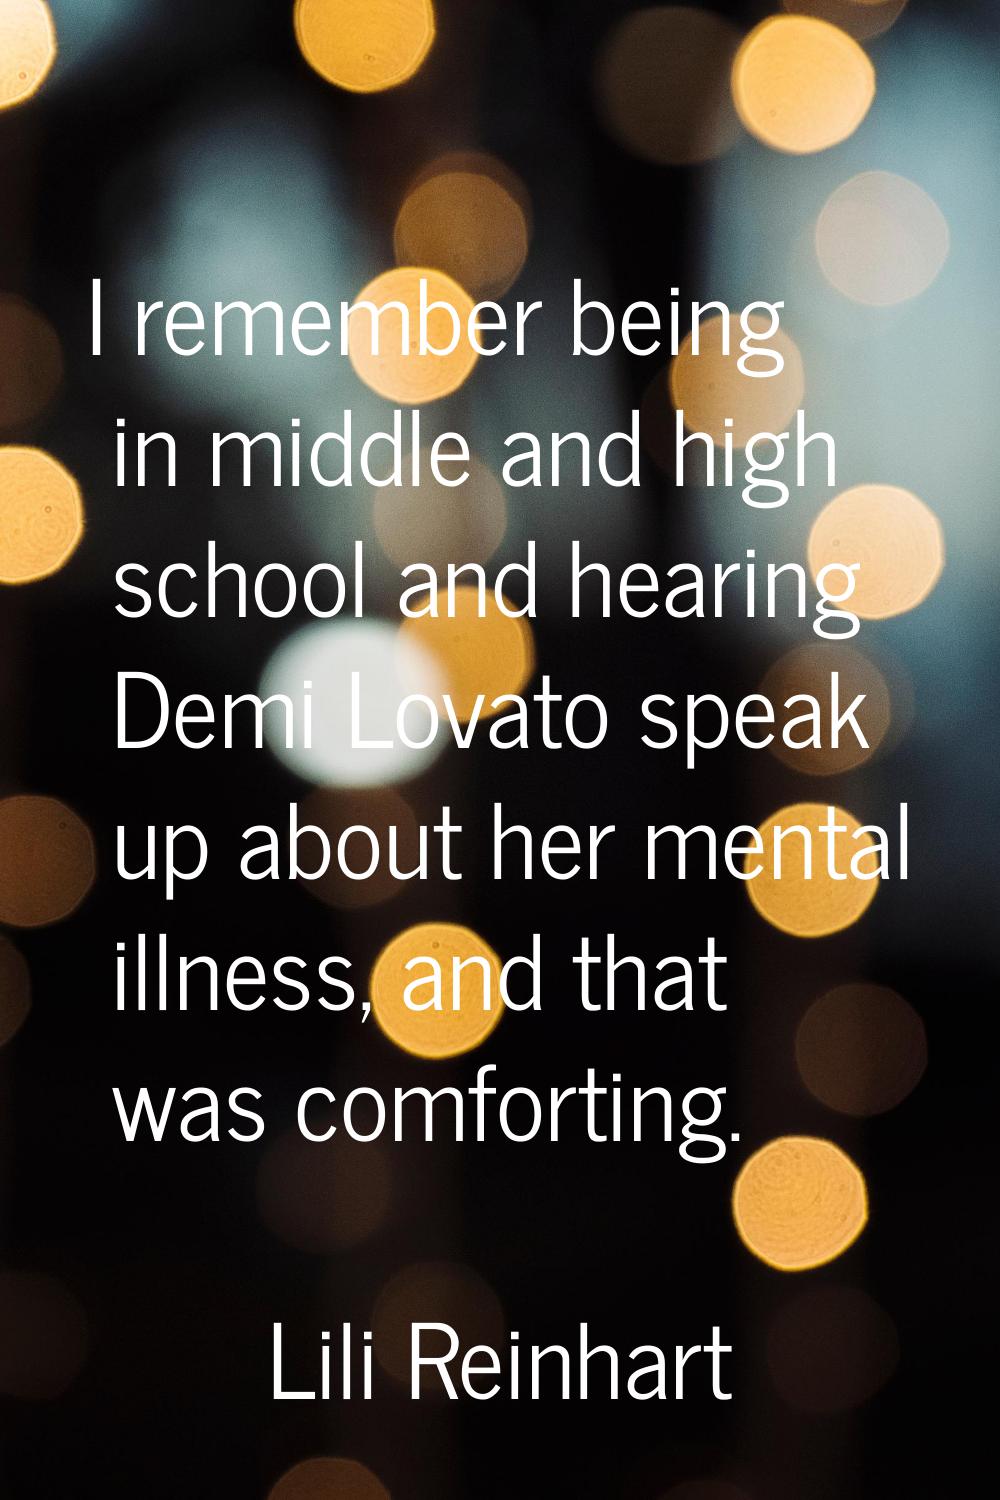 I remember being in middle and high school and hearing Demi Lovato speak up about her mental illnes